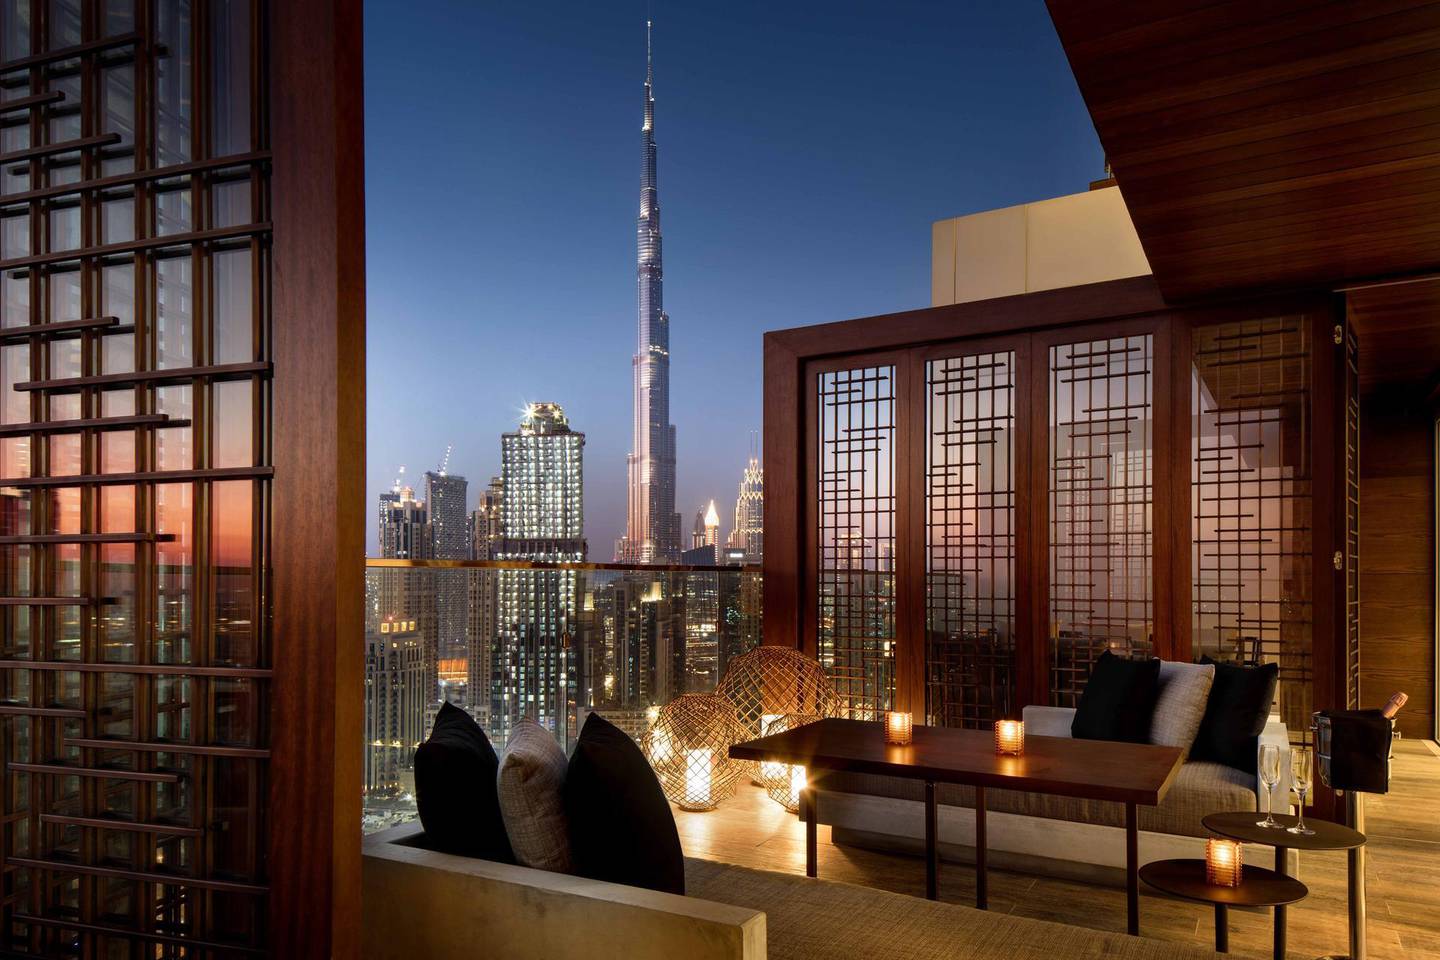 The view from one of the terraces. Courtesy Morimoto Dubai